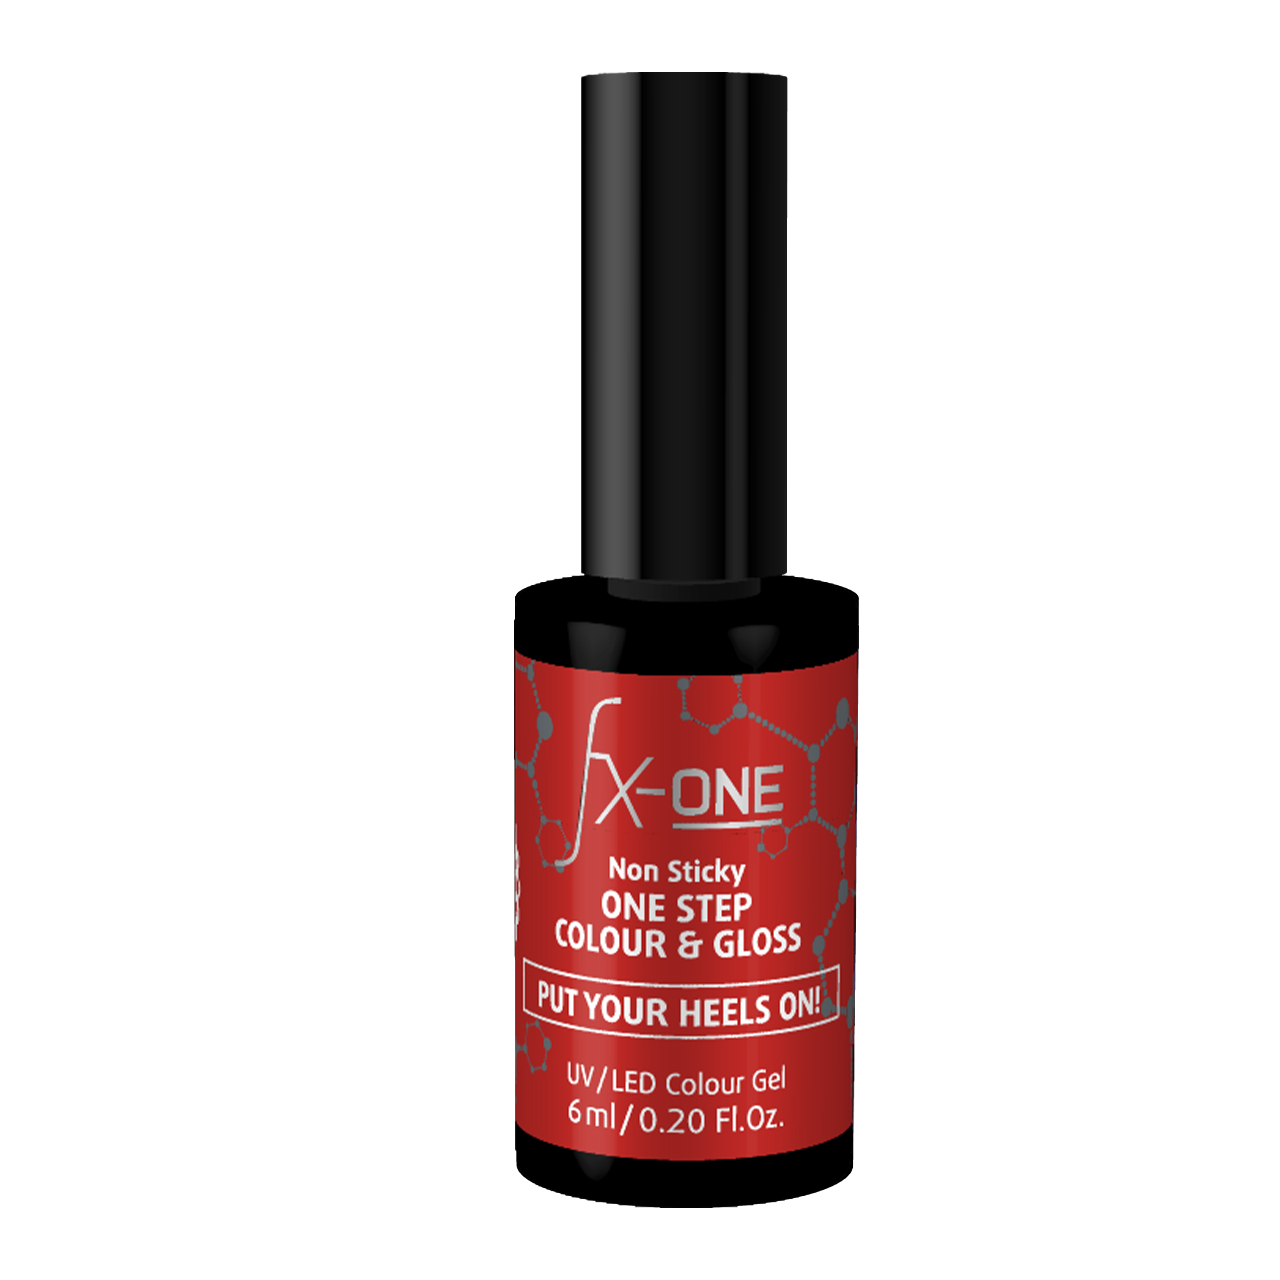 FX-ONE Colour & Gloss Put Your Heels On 6ml